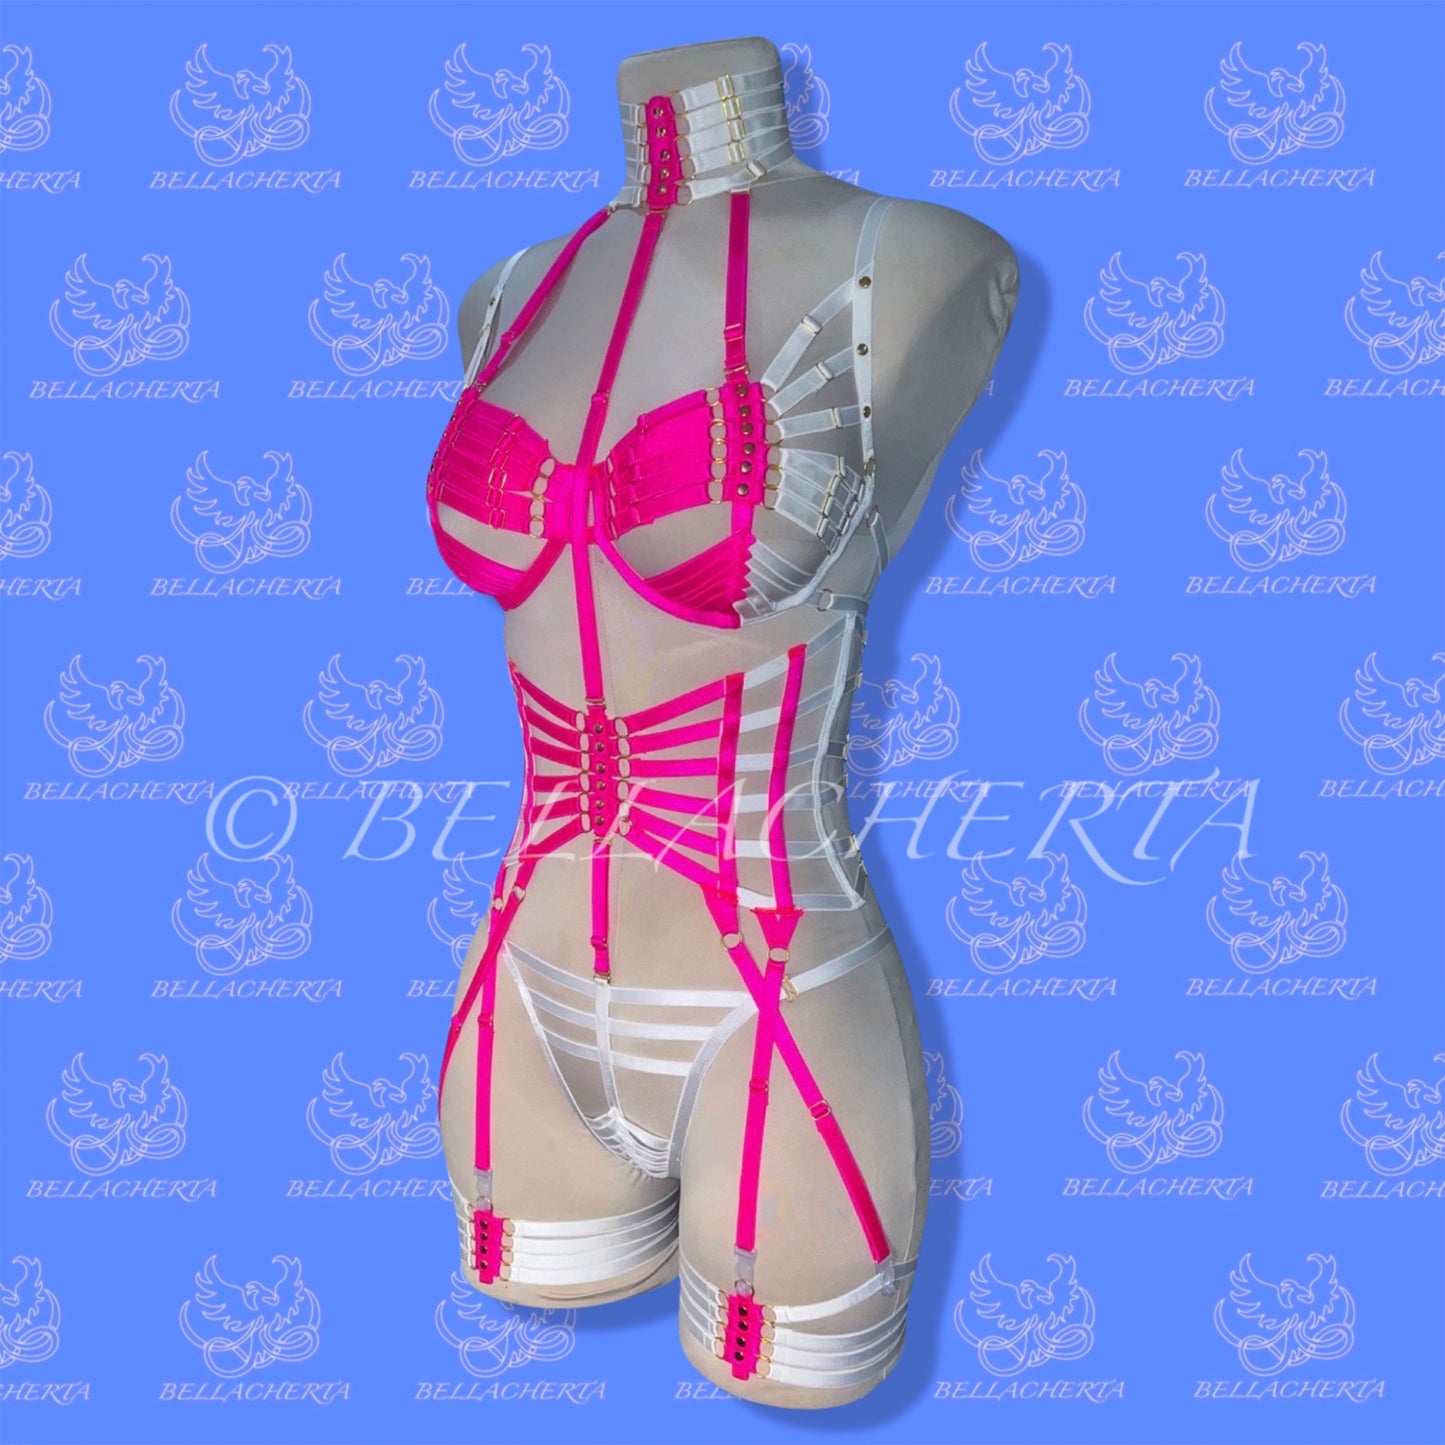 Full Body Harness Fluorescent Lingerie Strappy Two-Tone Bra with Matching Choker, Panties, Garter Belt and Garters, Glow in the Dark